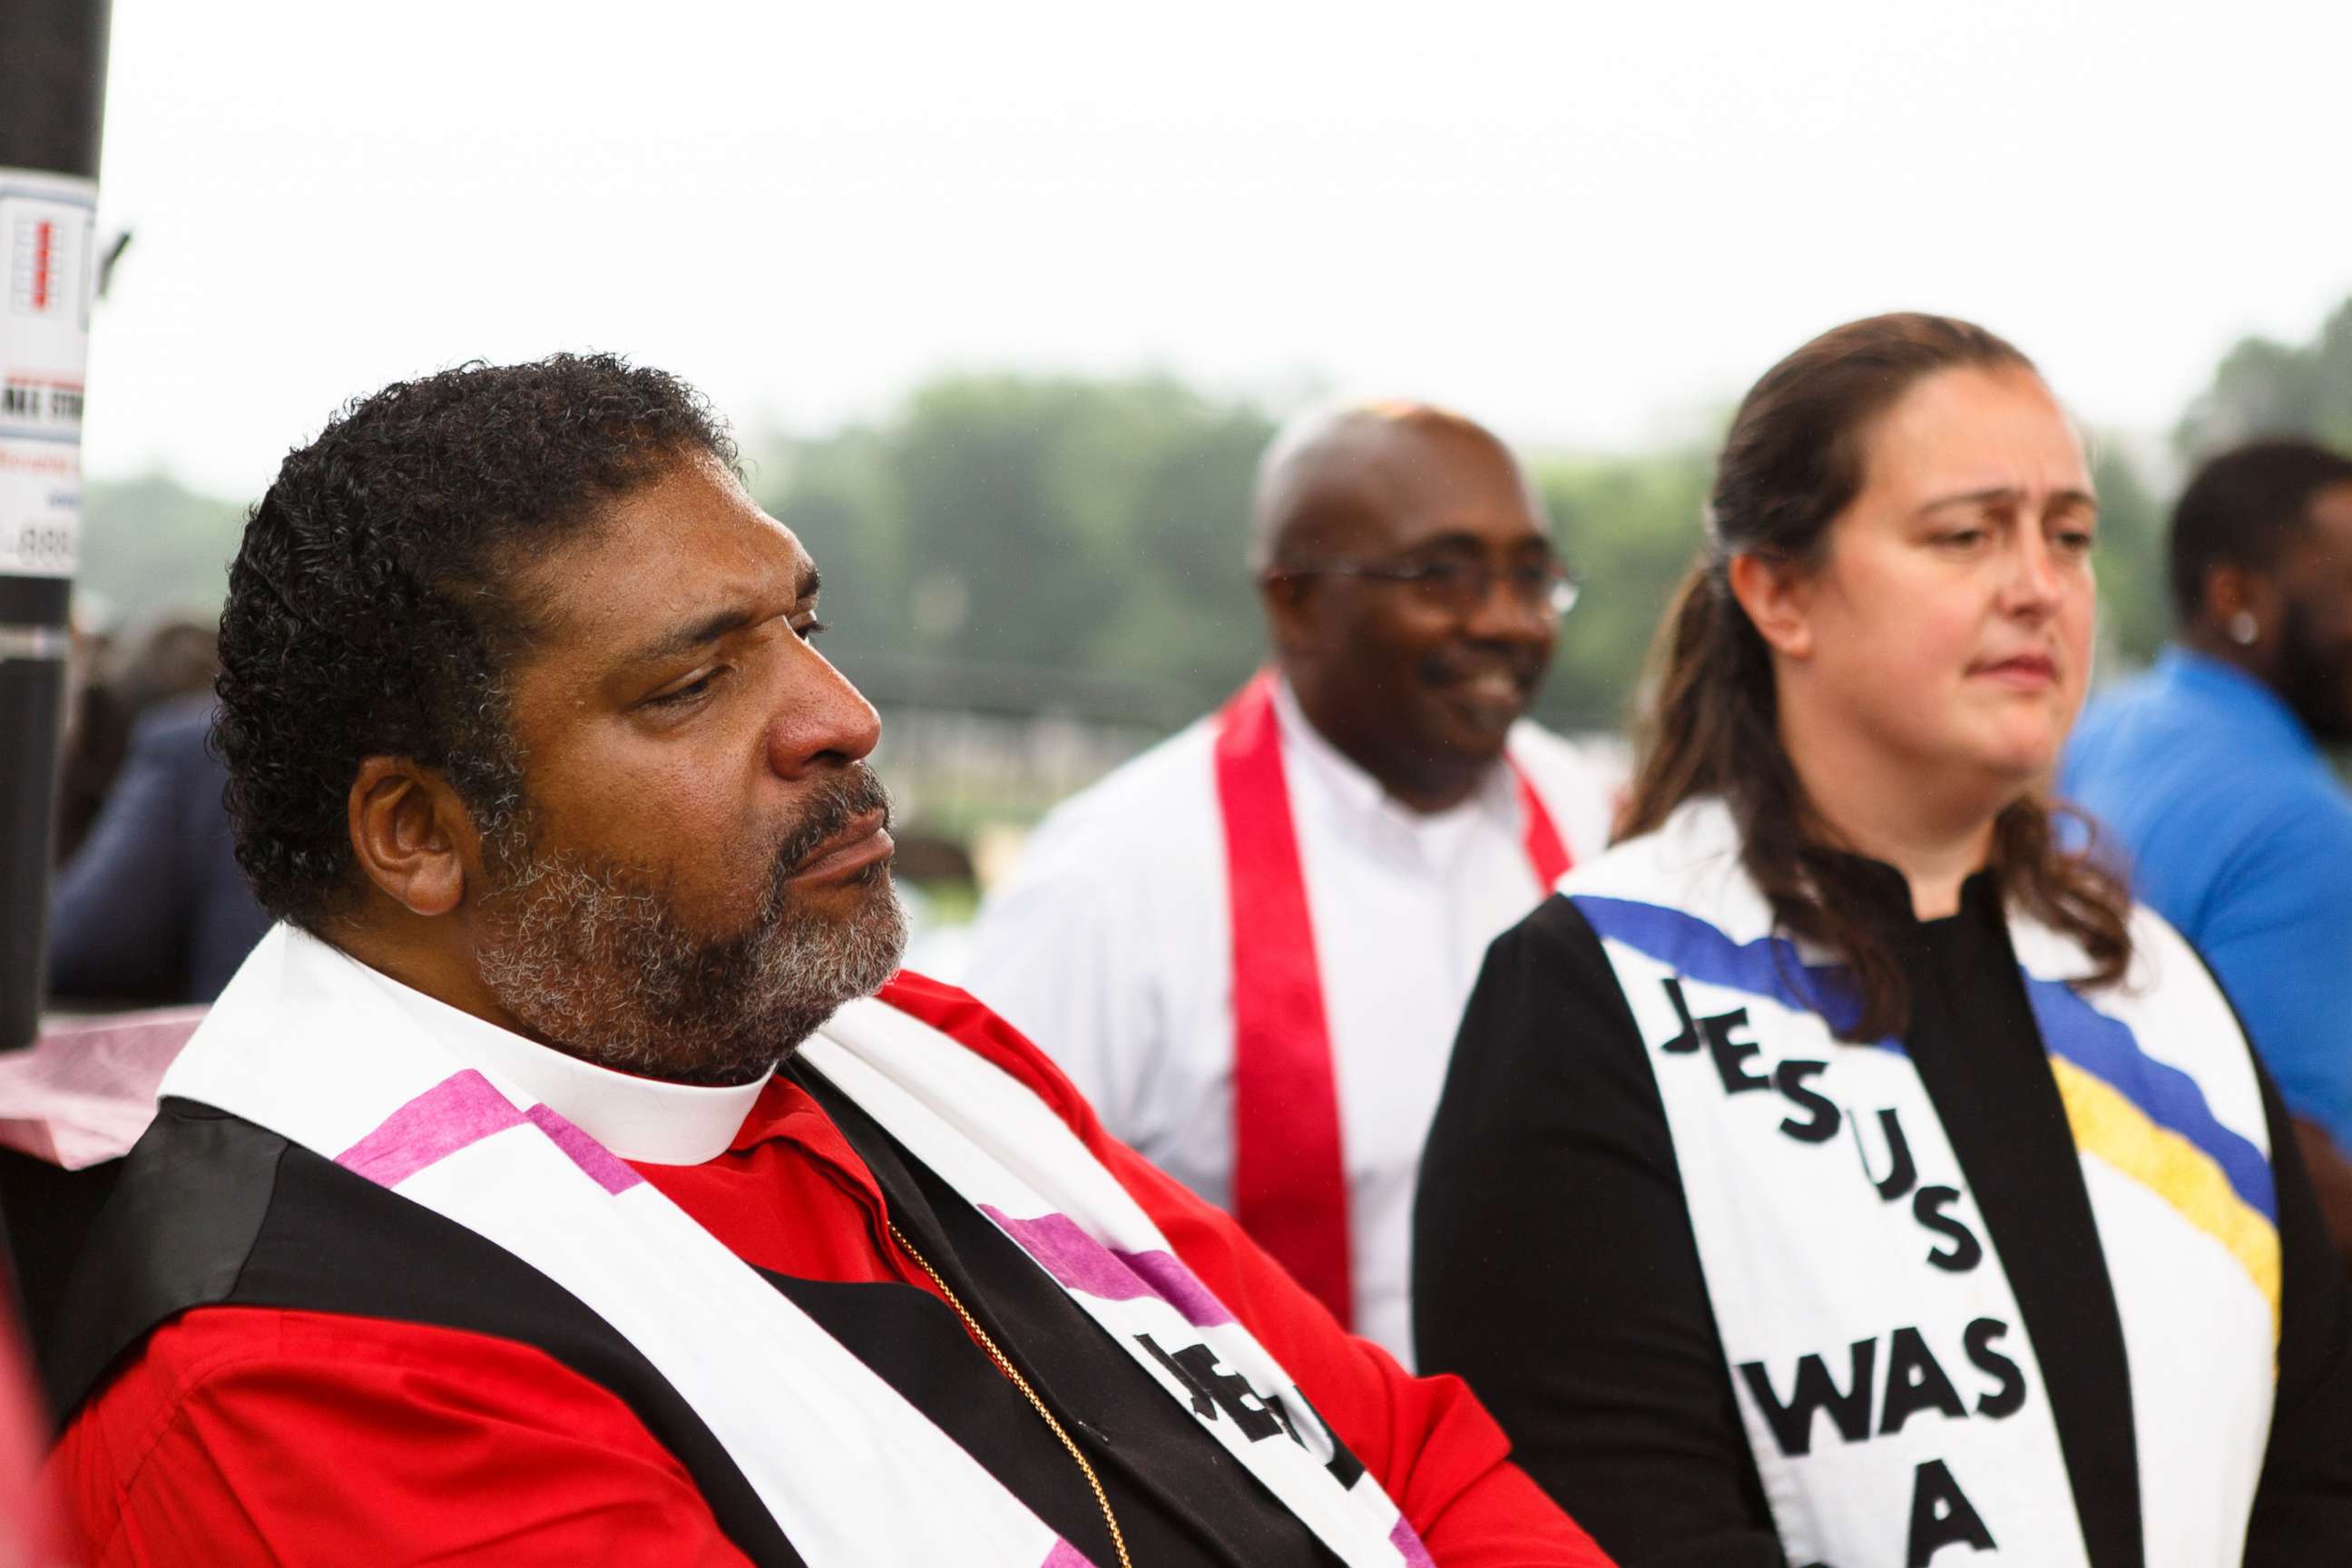 PHOTO: In this June 23, 2018, file photo, Rev. William J. Barber is shown in Washington, DC.